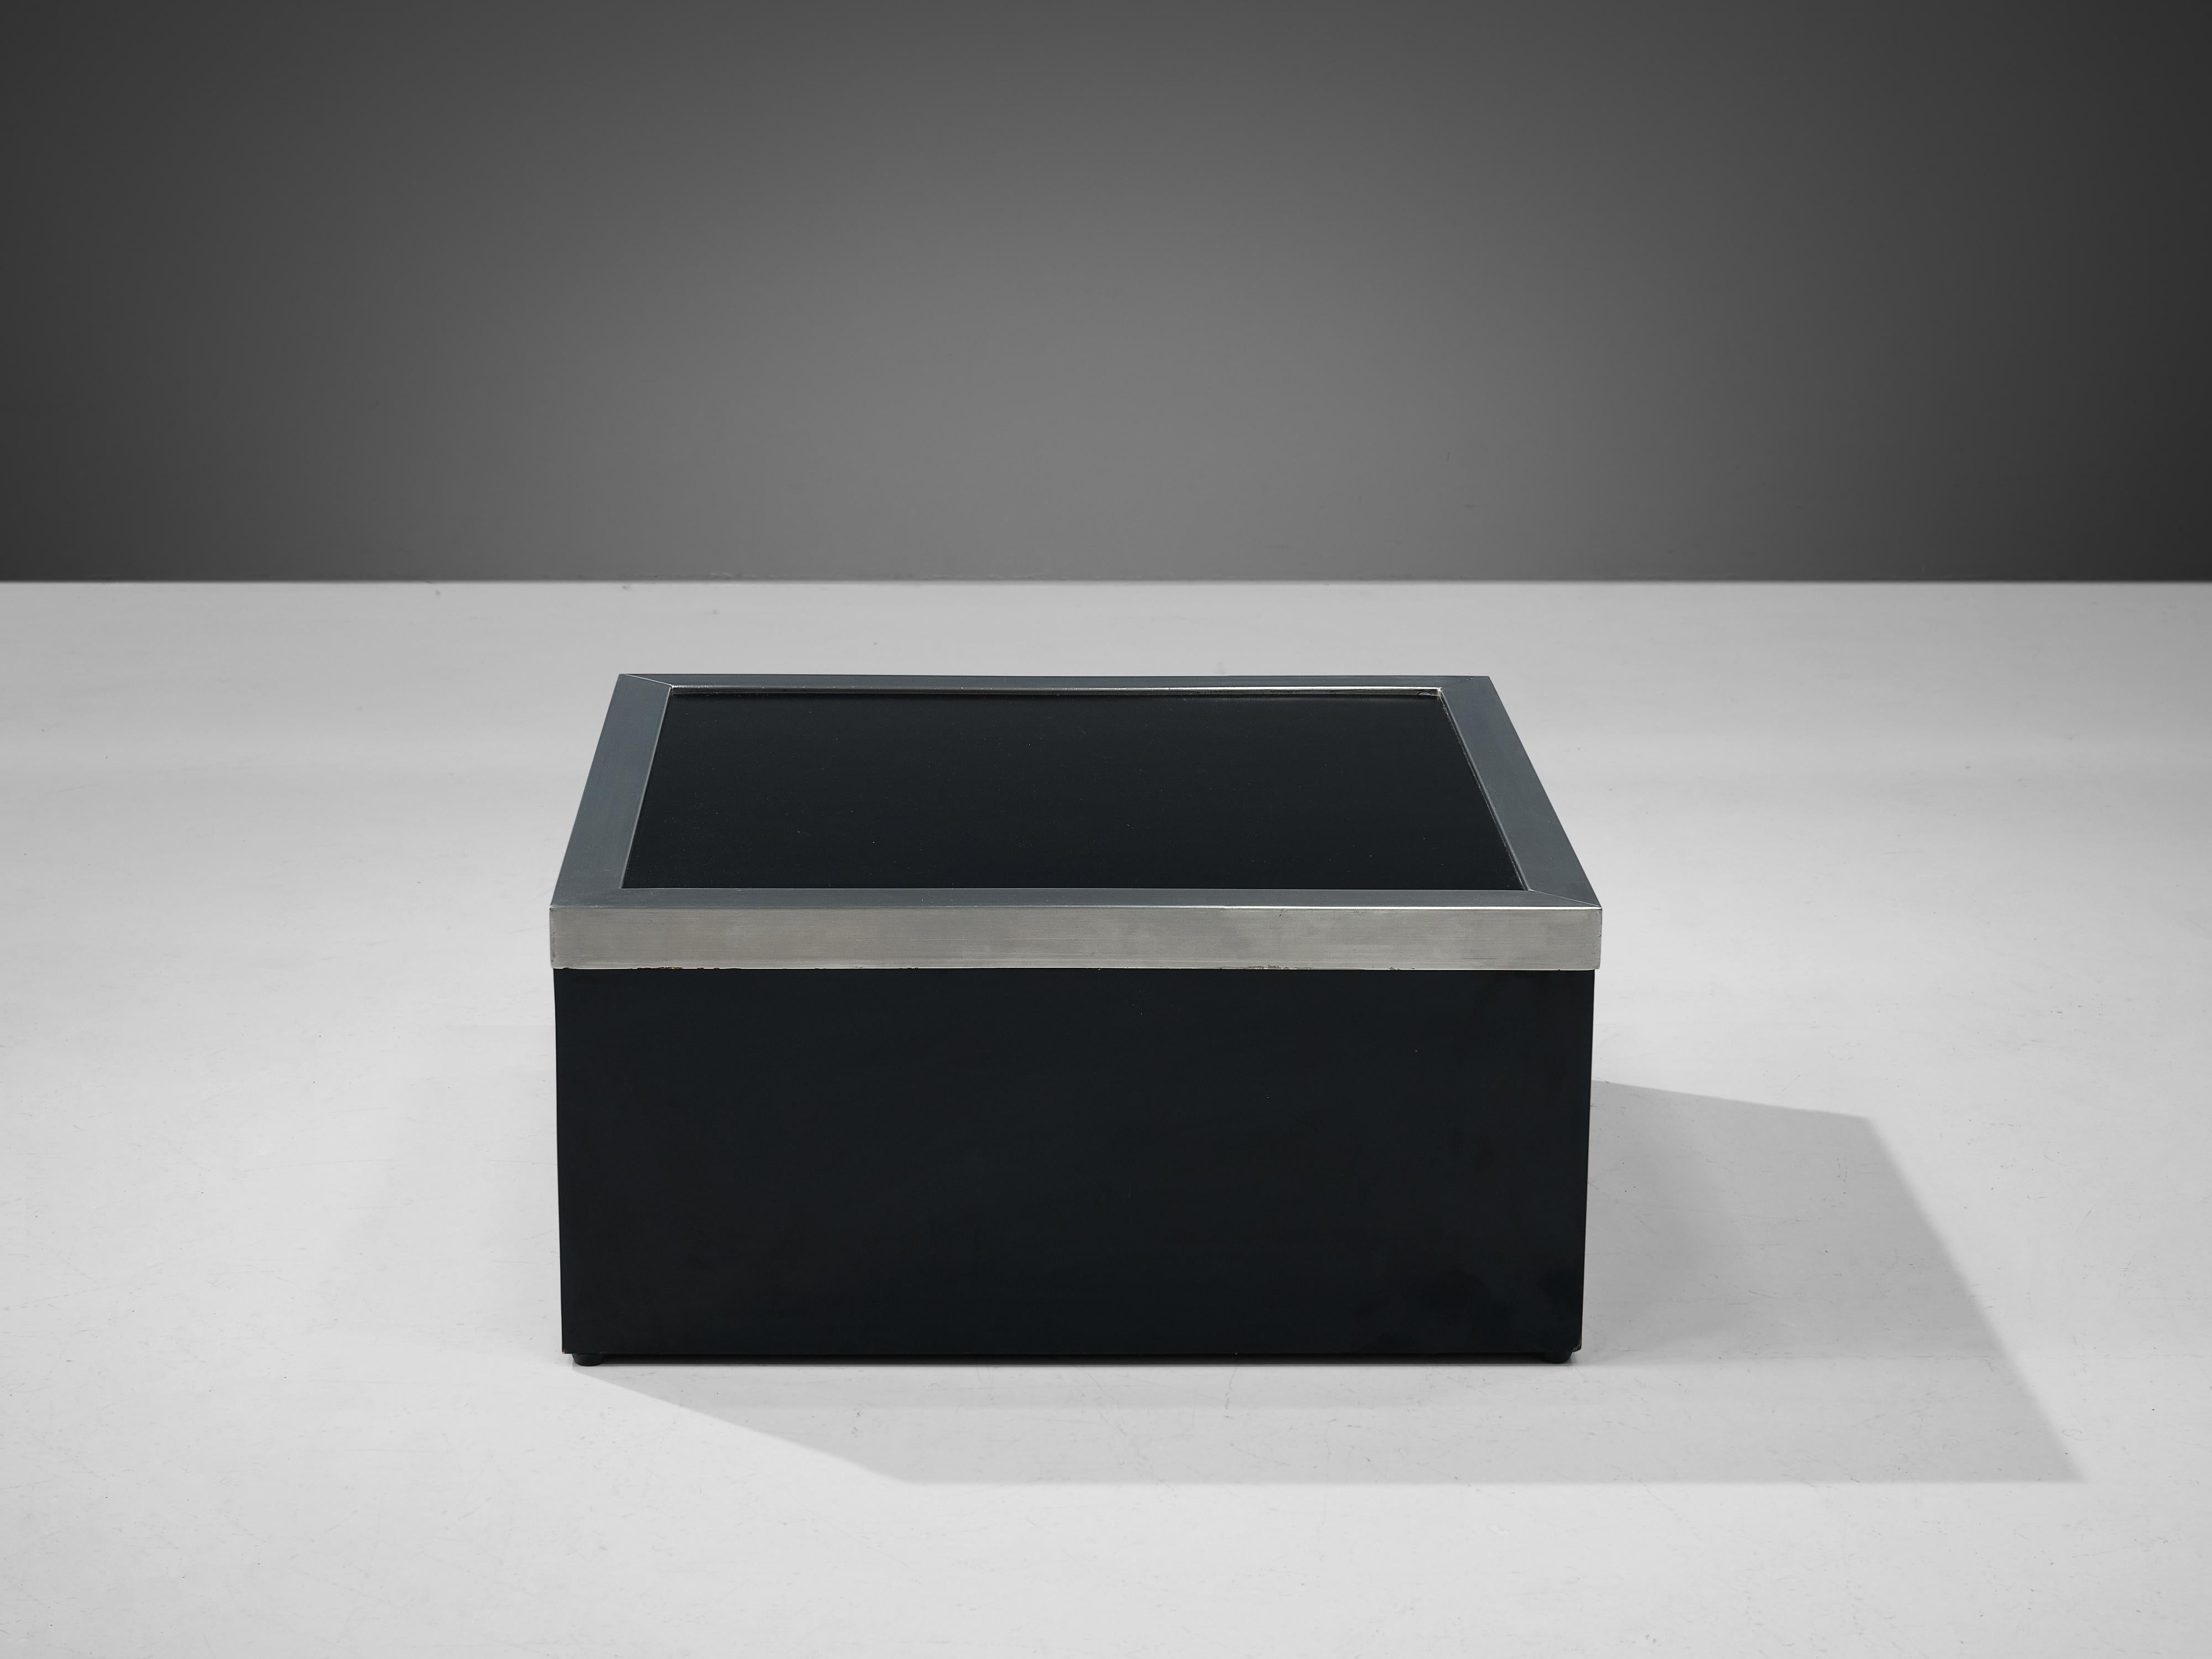 Coffee table, aluminum, lacquered wood, Italy, 1970s

This black coffee table was made in the 1970s in Italy. The squared top has a aluminum side border, emphasizing the shape of the design. The top is supported by a sturdy, low base, giving it a